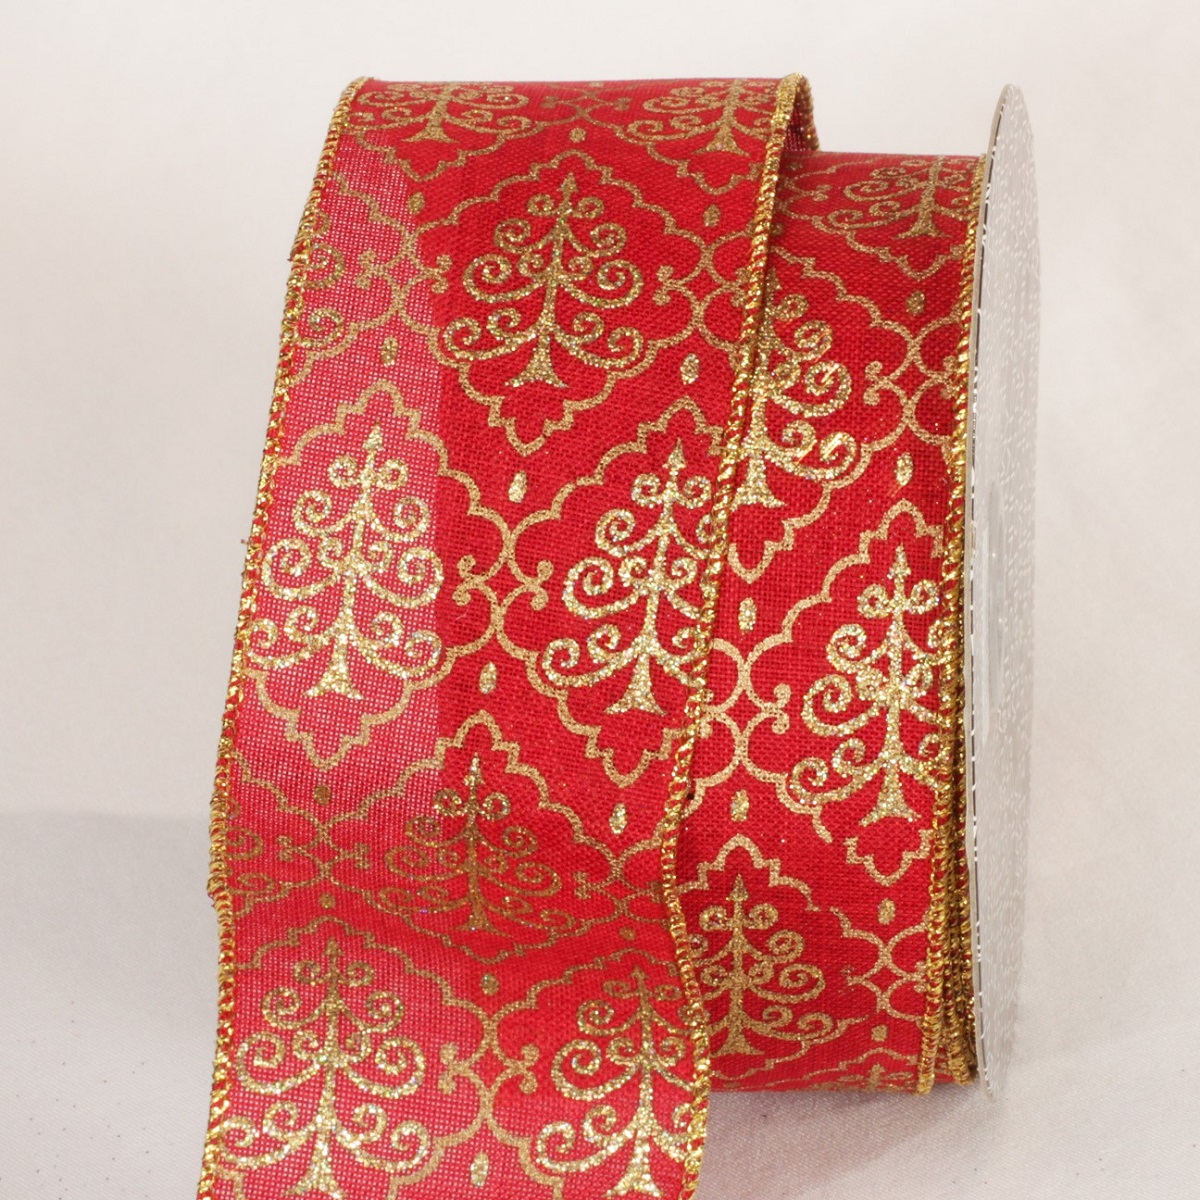 The Ribbon People Gold and Cherry Red Tree Design Wired Craft Ribbon 2.5" x 20 yards